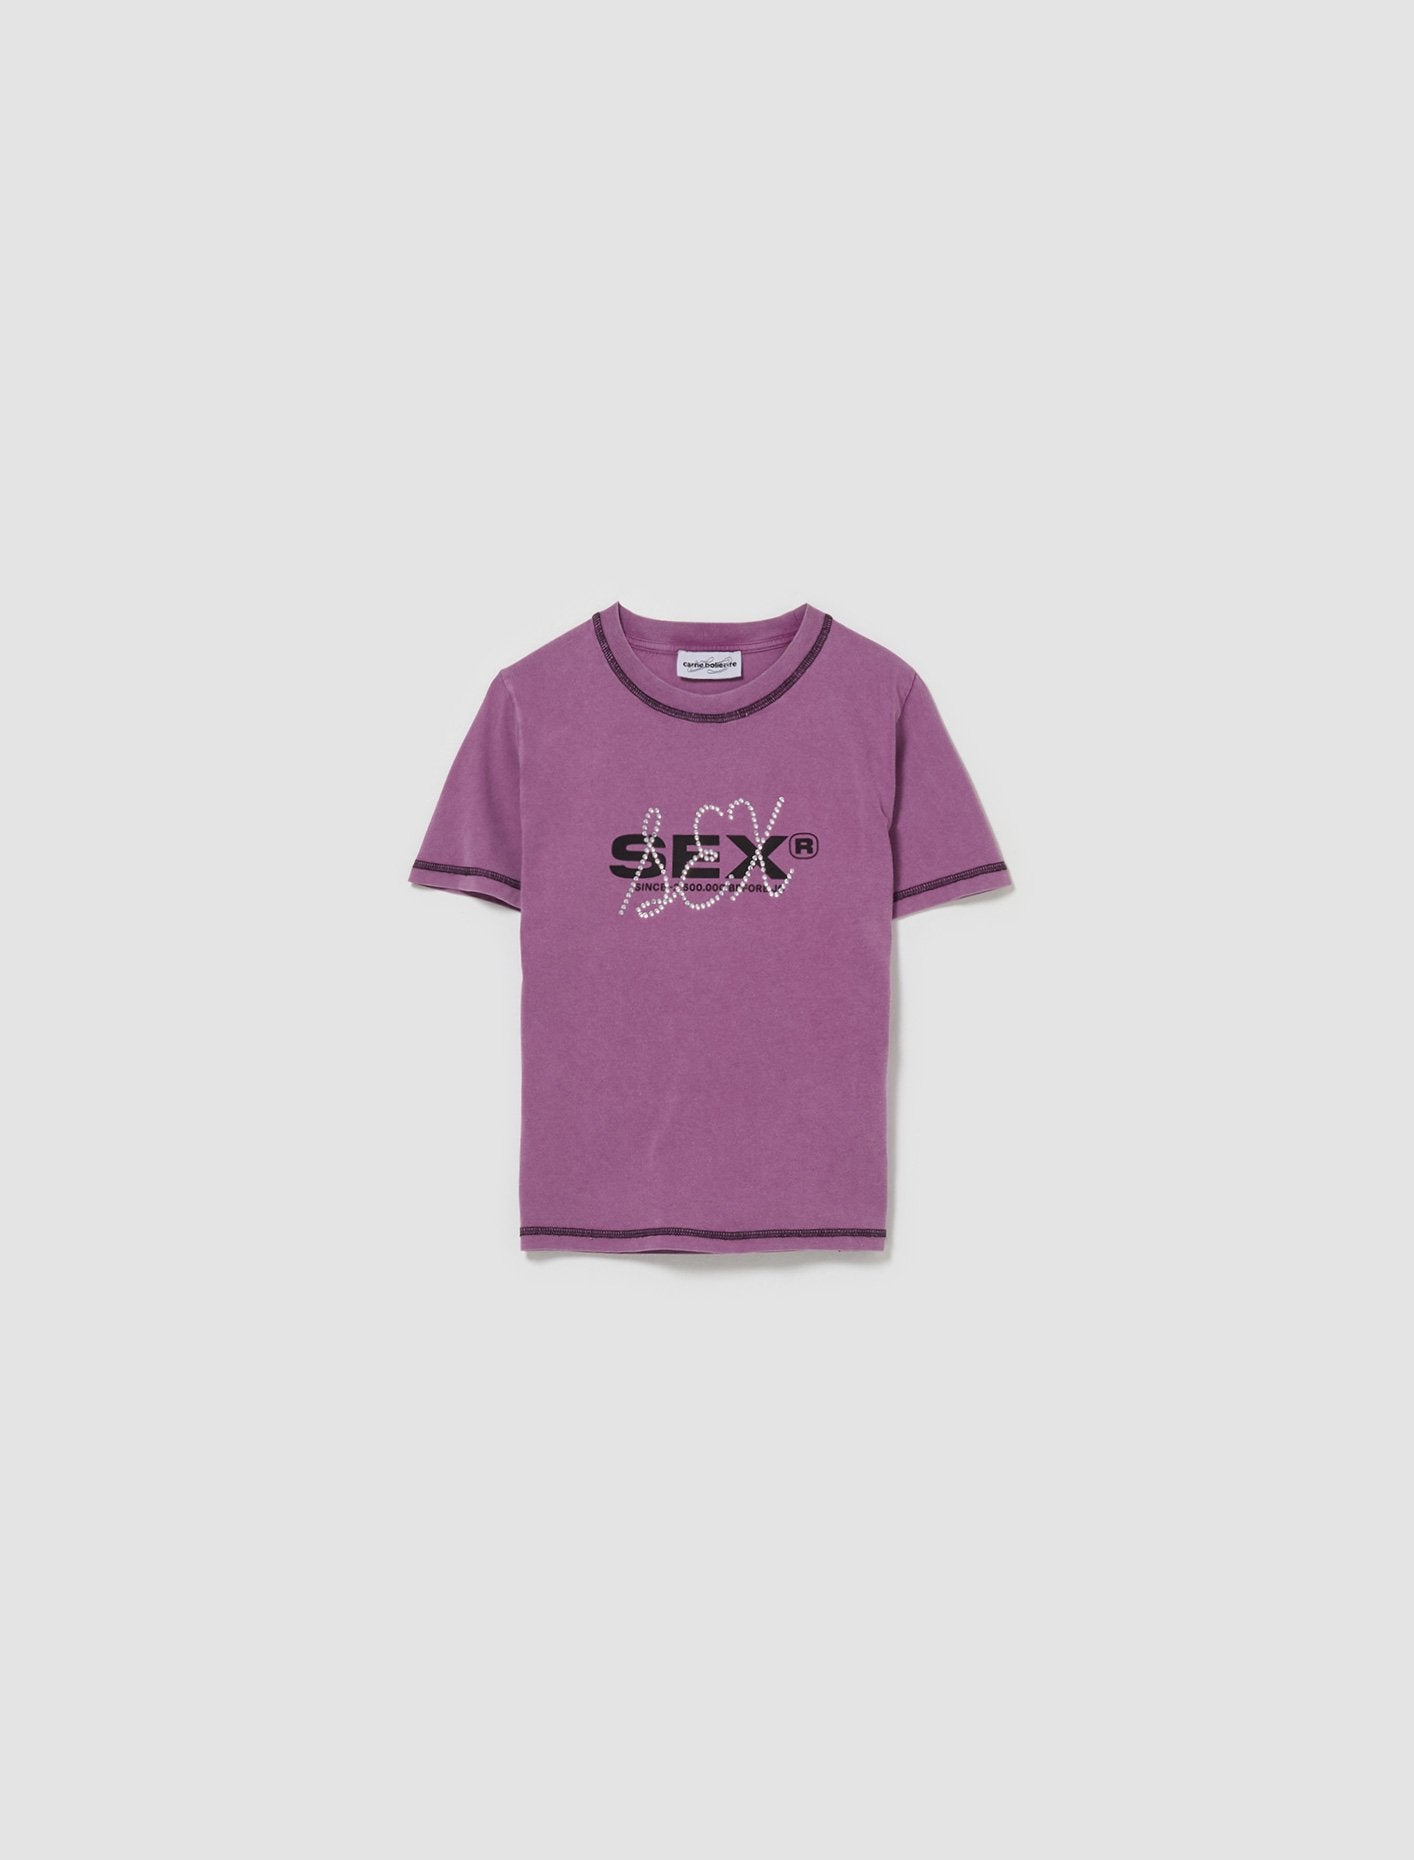 Two Better Than One T-Shirt in Washed Purple